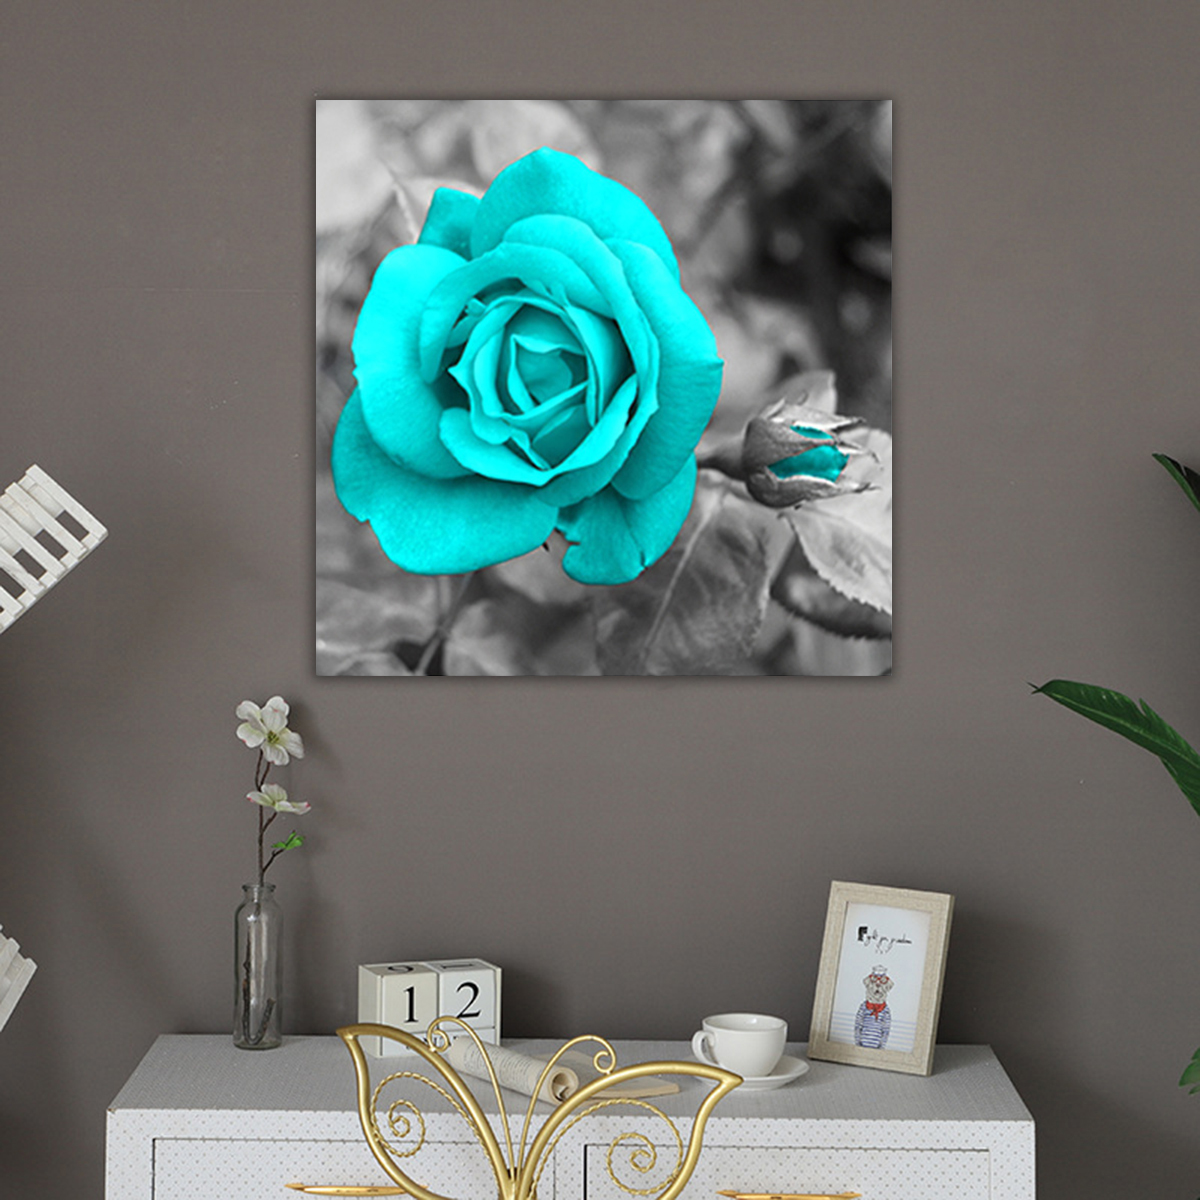 Blue-Rose-Canvas-Painting-Wall-Decorative-Print-Art-Pictures-Unframed-Wall-Hanging-Home-Office-Wall--1778176-8